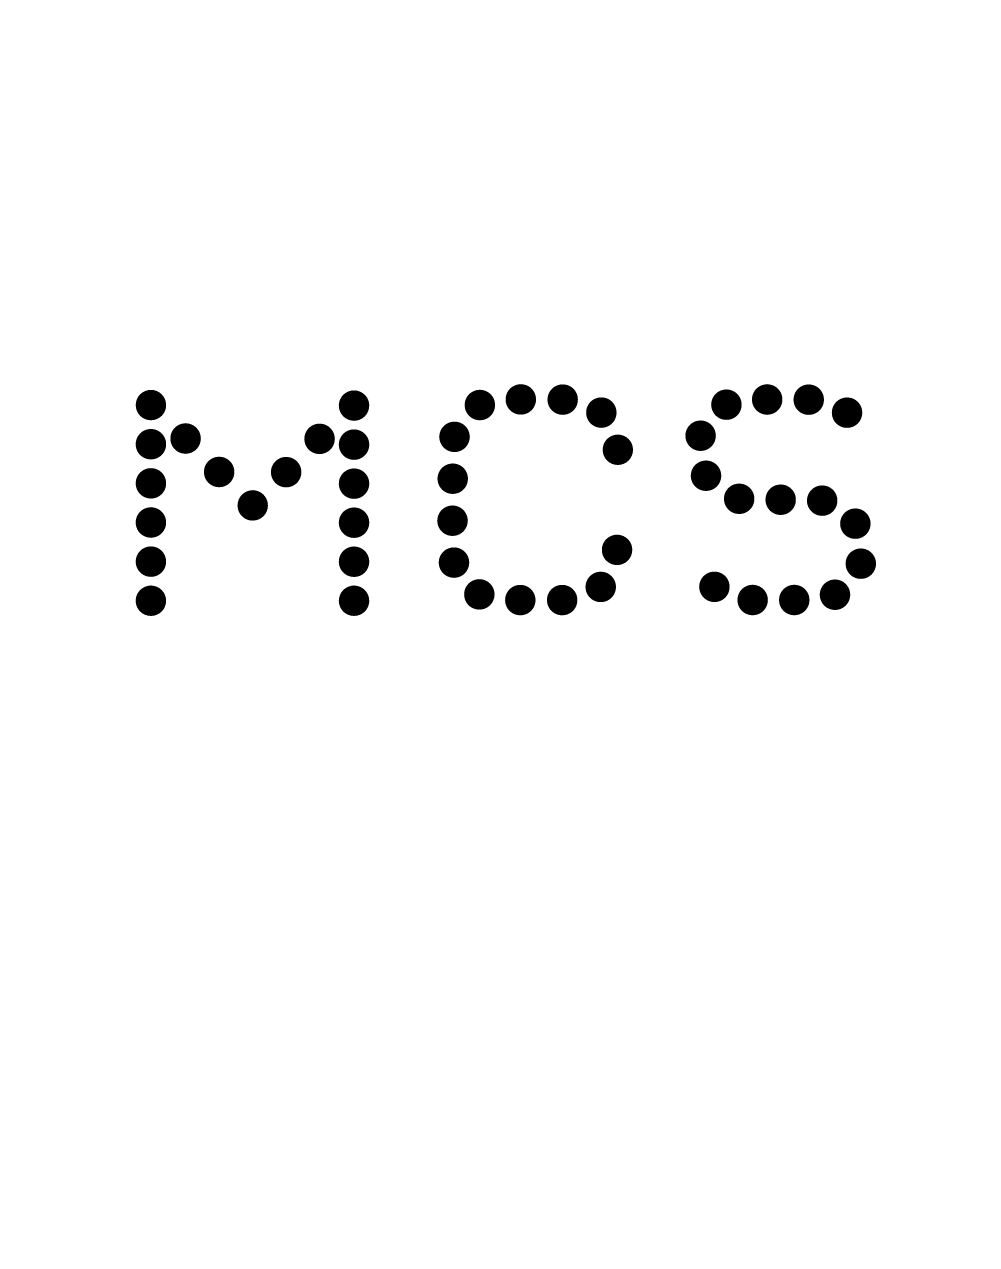 Cotswold Solar Solutions MCS Certified